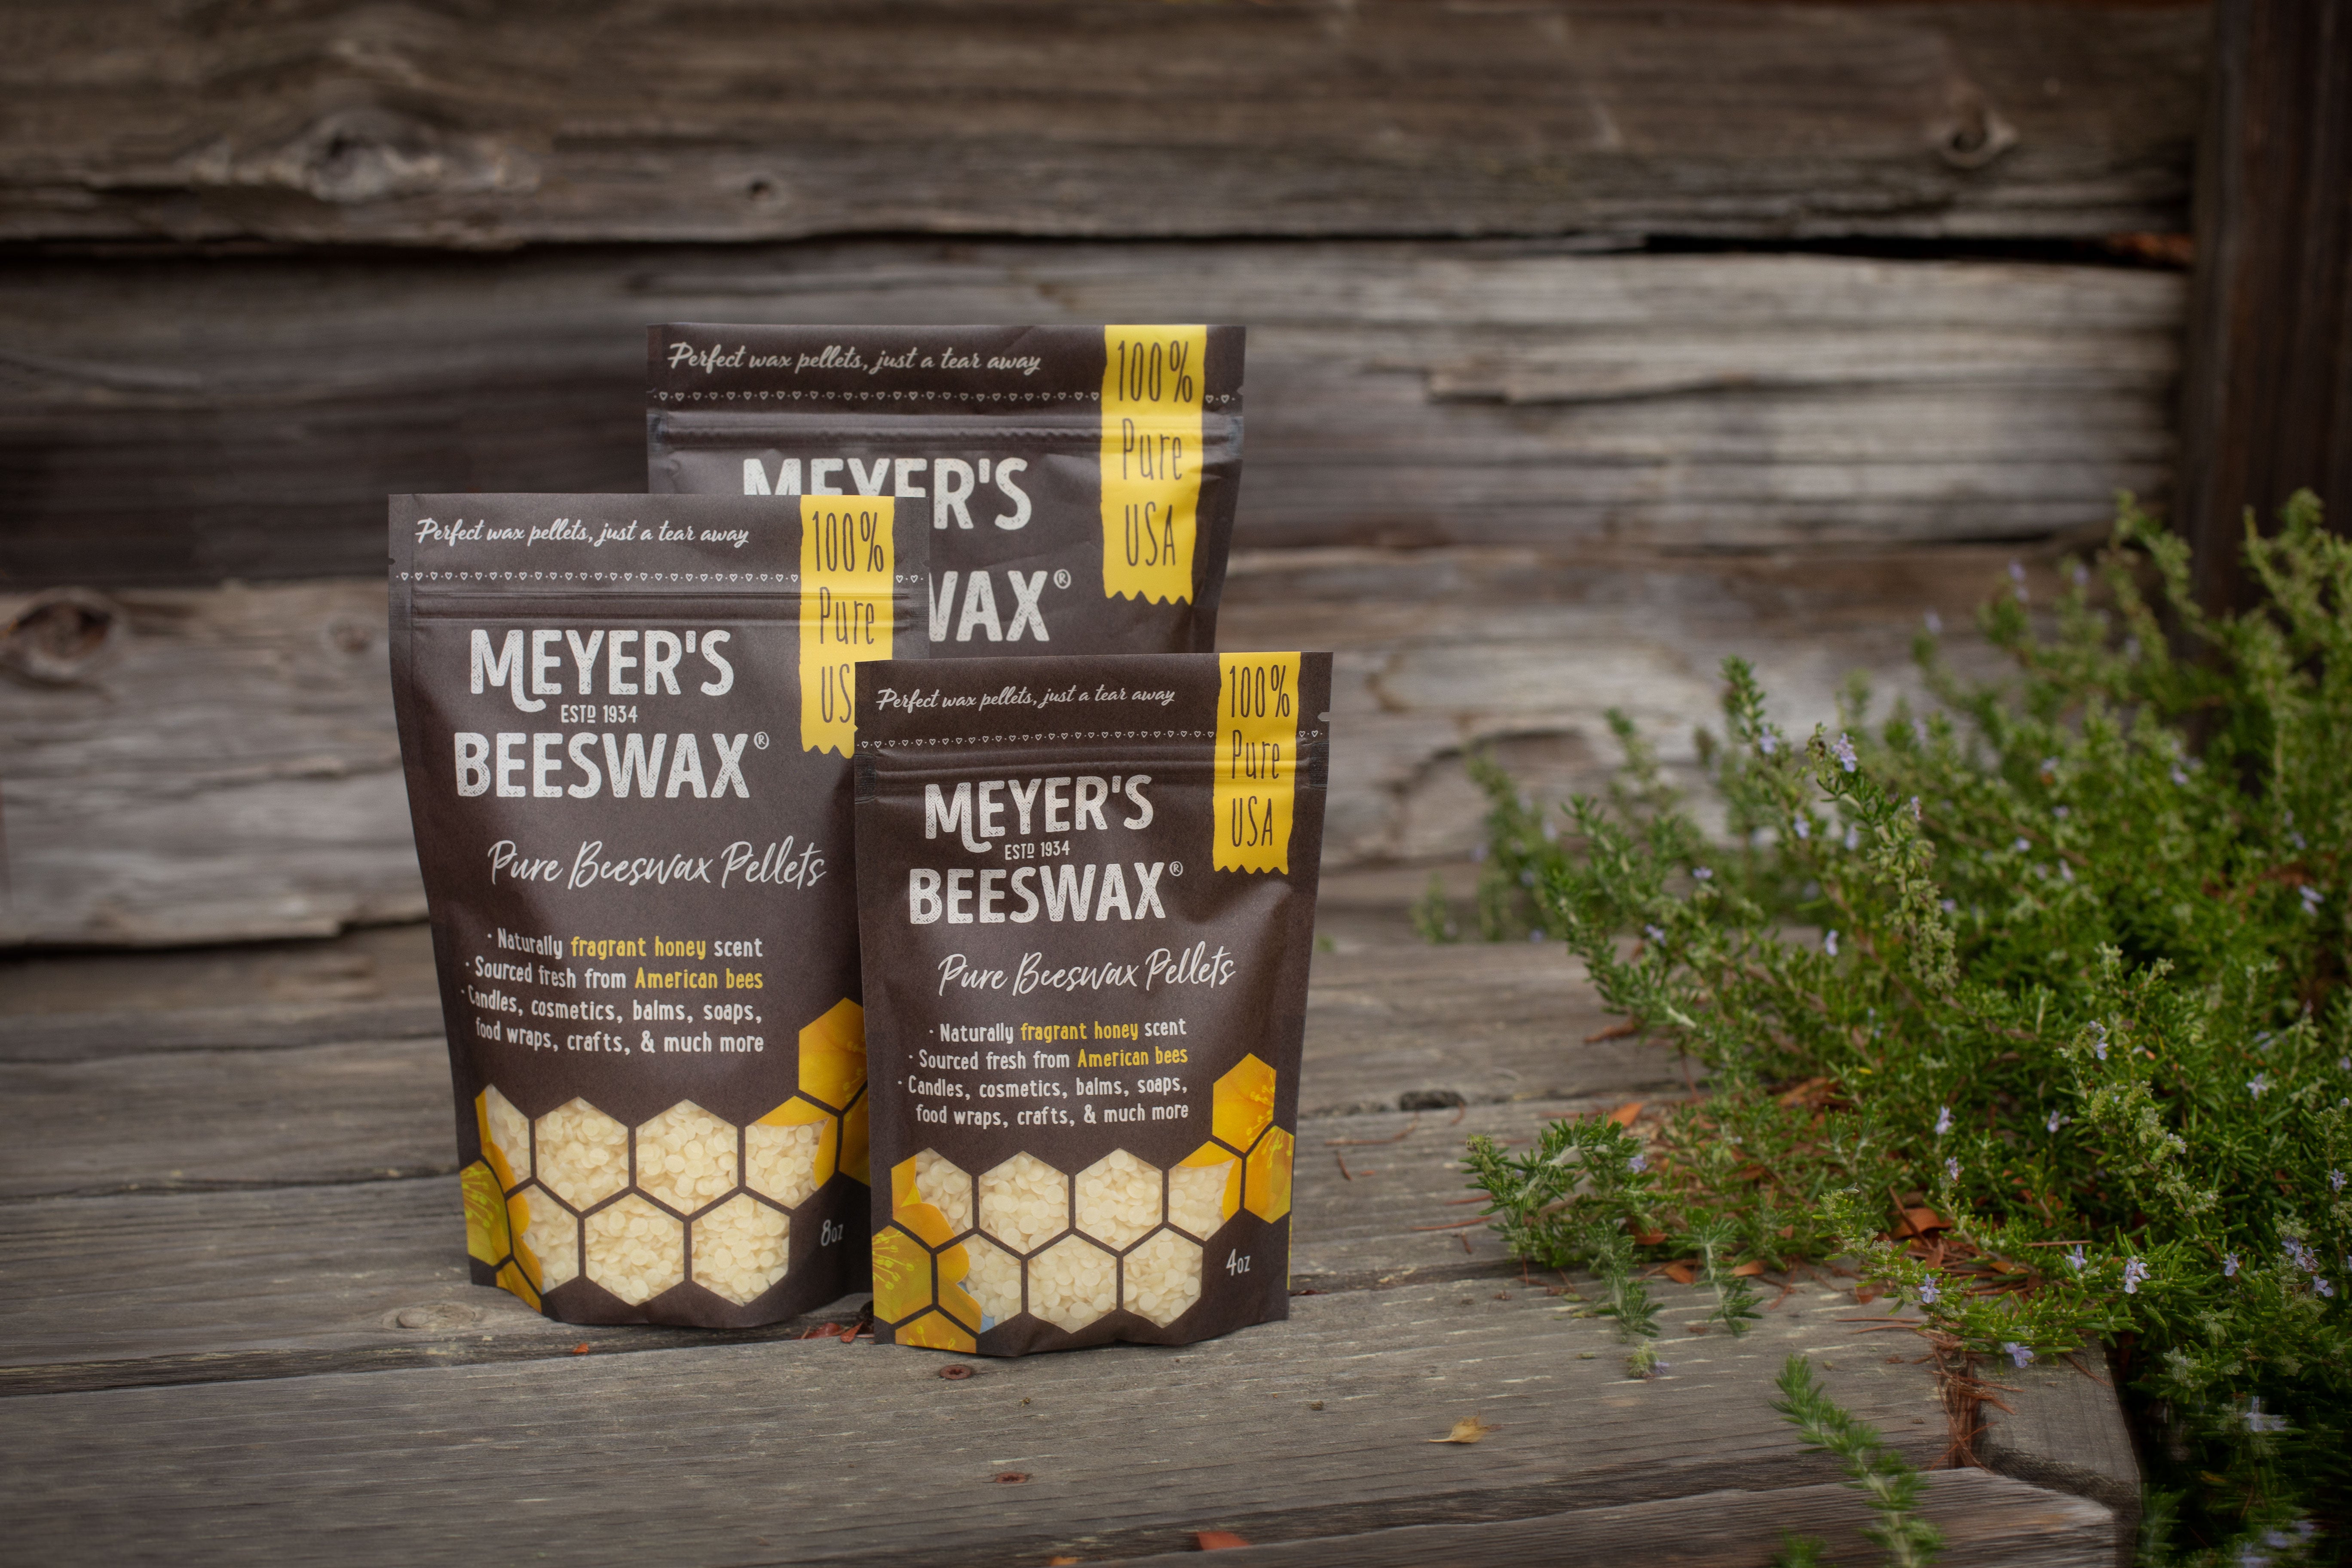 One honest ingredient: 100% USA fresh triple-filtered beeswax